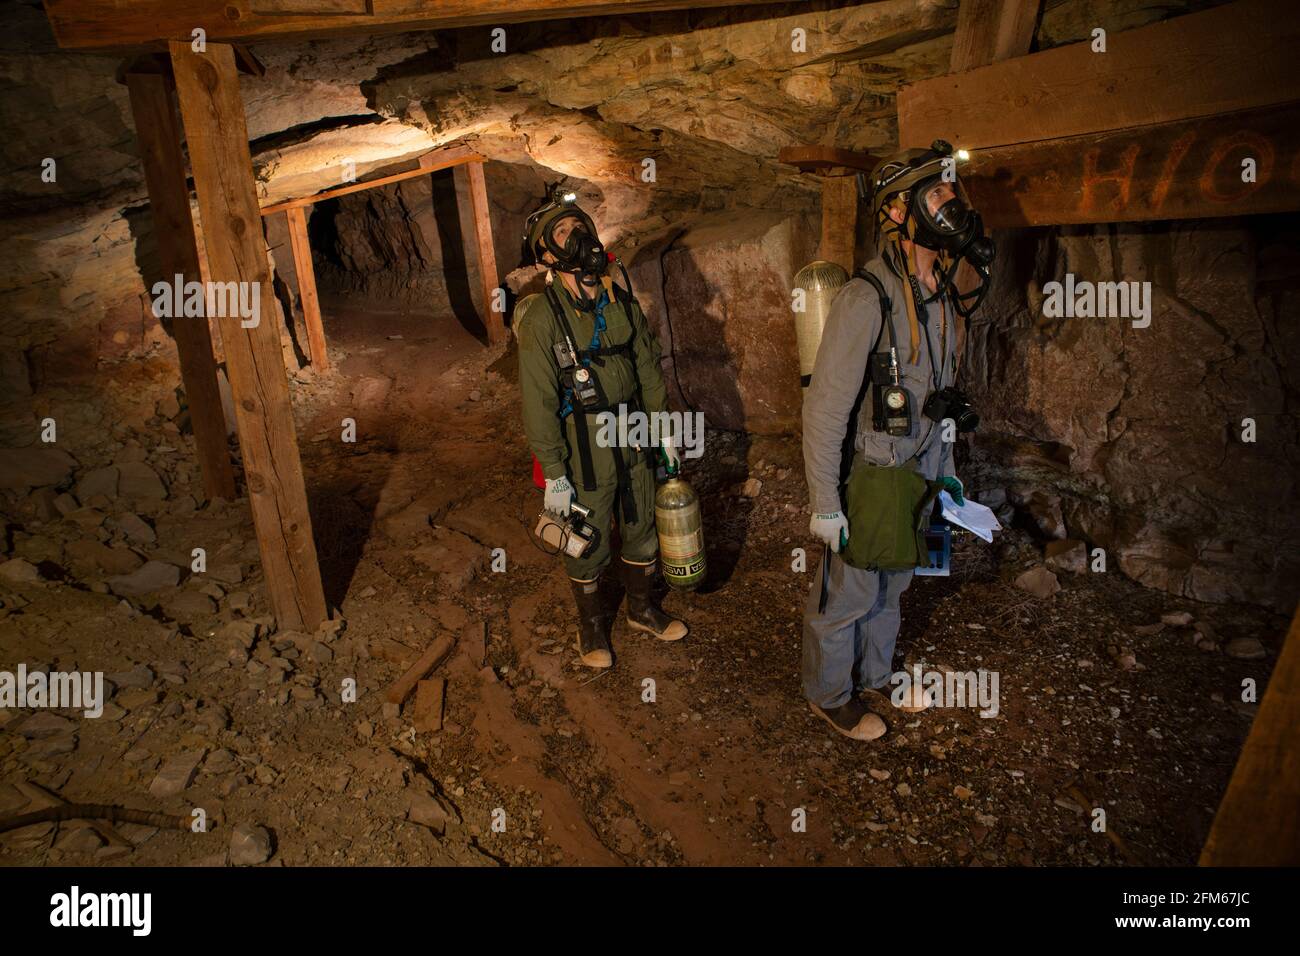 USA: Dillon Metcalf and Ethan Sandoval using SCBA gear to enter the Buckshot  uranium mine adit complex. THESE FEARLESS explorers have braved a uraniu Stock Photo